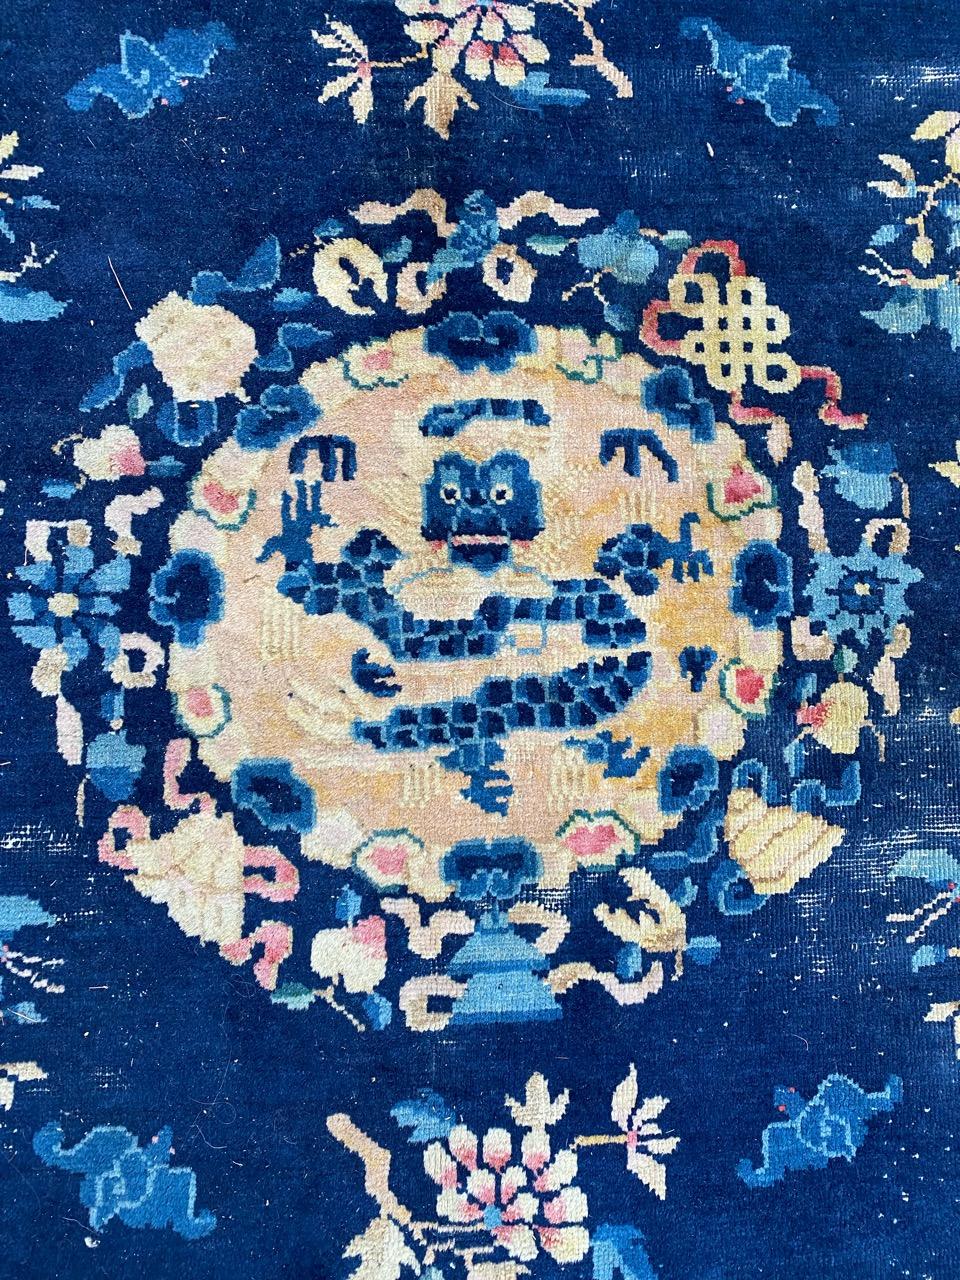 Very beautiful late 19th century Chinese beijing rug with beautiful Chinese design with dragon, birds and flowers, and nice natural colors, entirely hand knotted with wool velvet on cotton foundation.